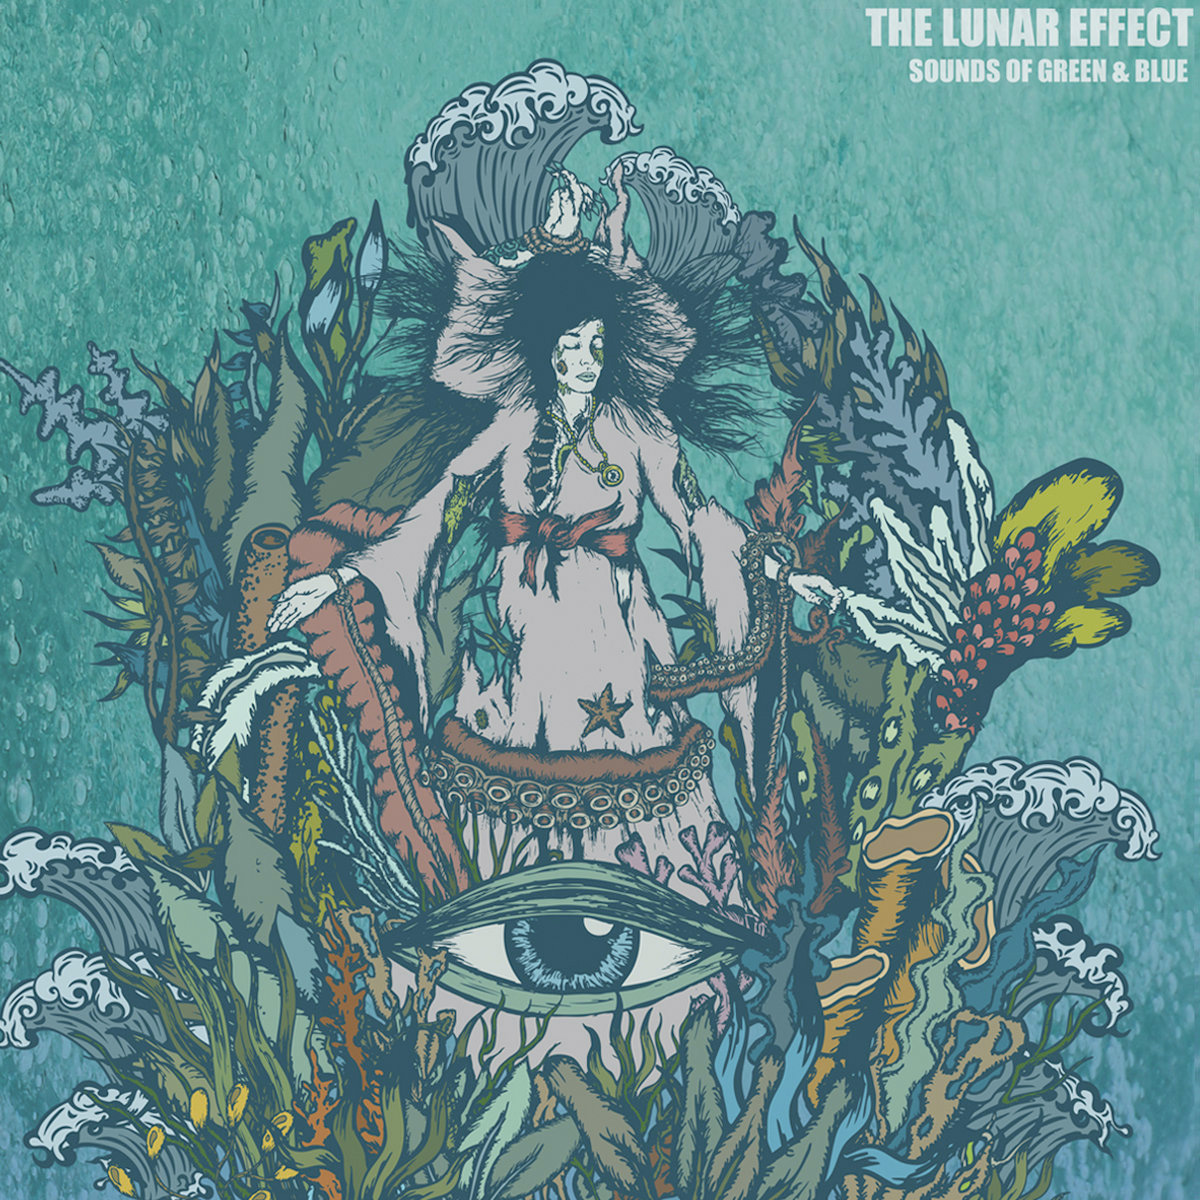 Sounds of Green & Blue by The Lunar Effect